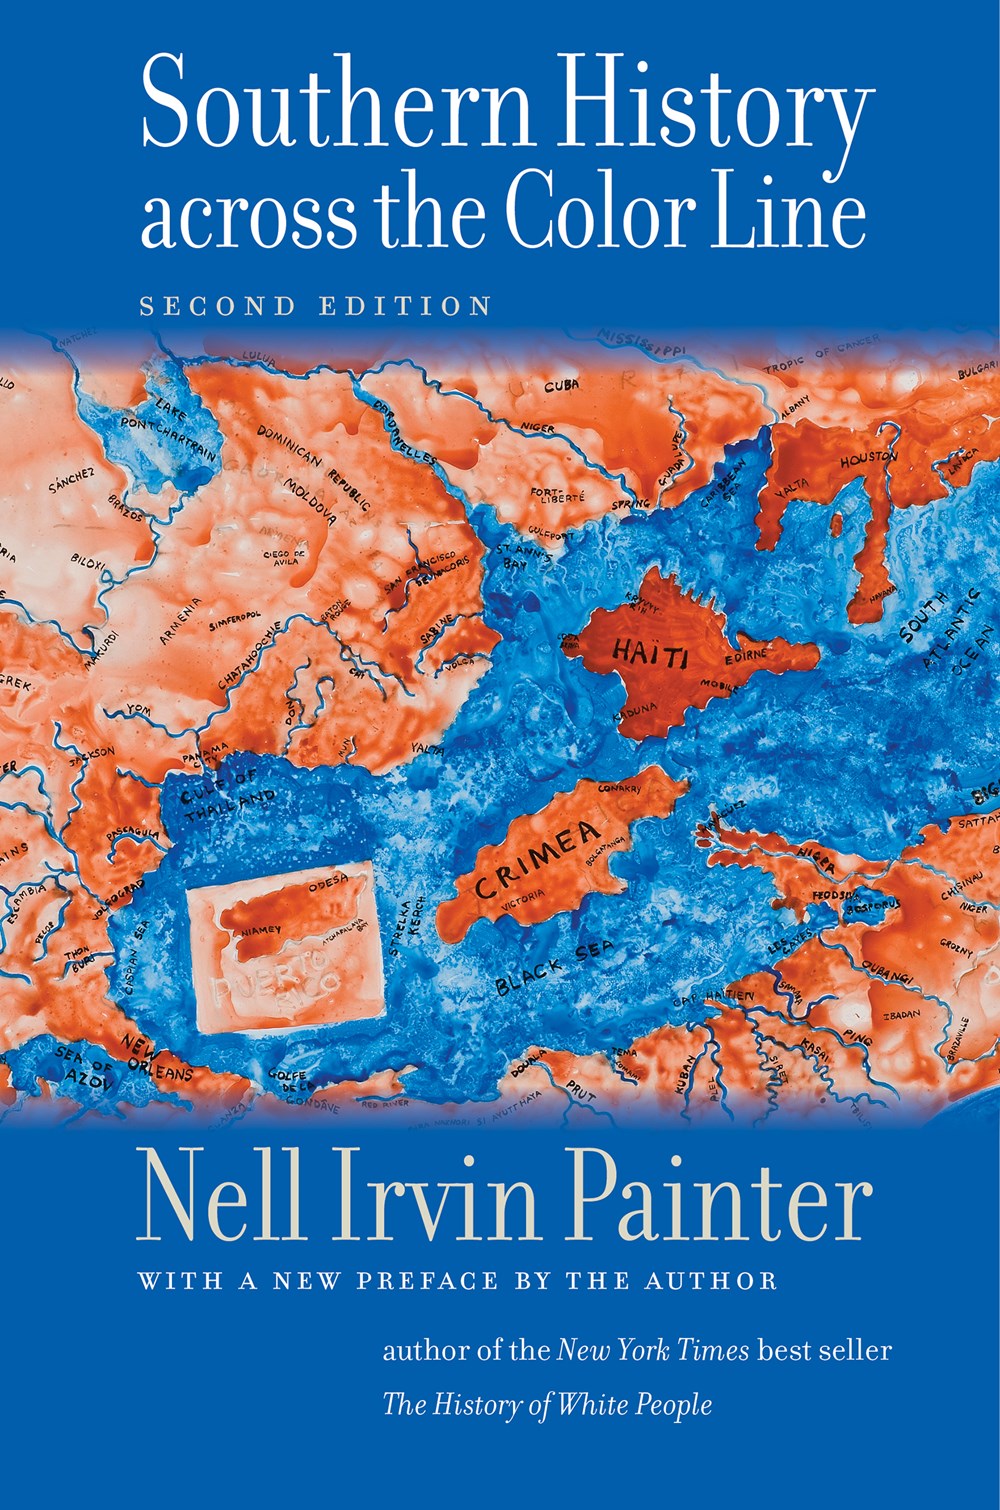 Southern History across the Color Line (2nd Edition) by Nell Irvin Painter